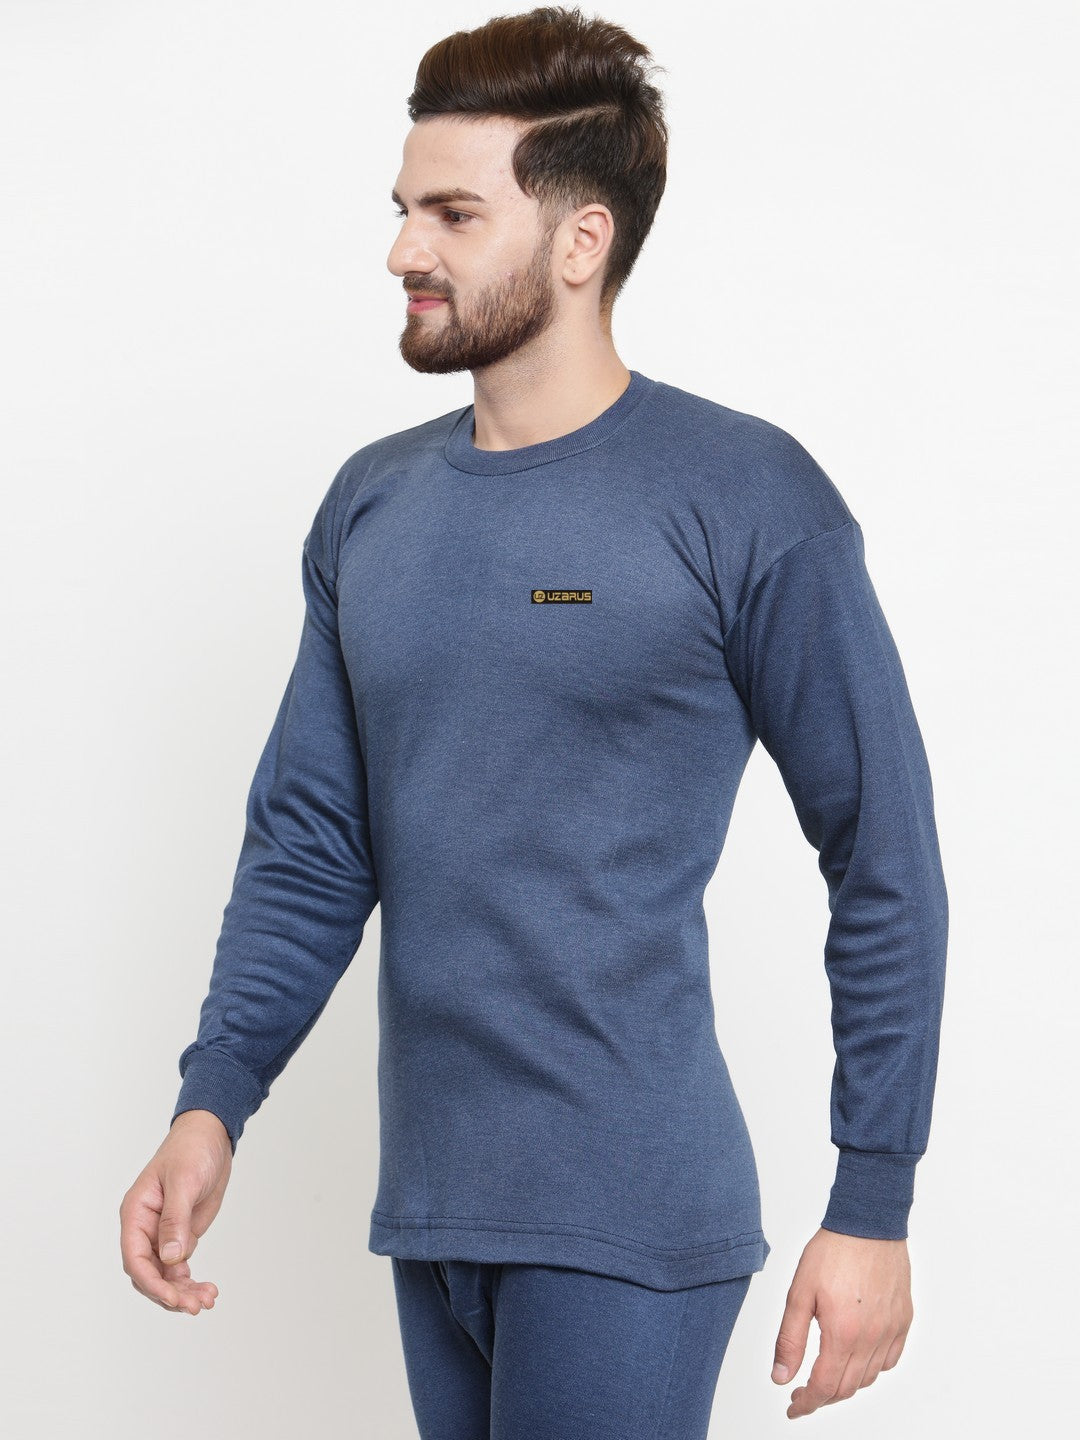 MEN'S SOLID ROUND NECK THERMAL TOP